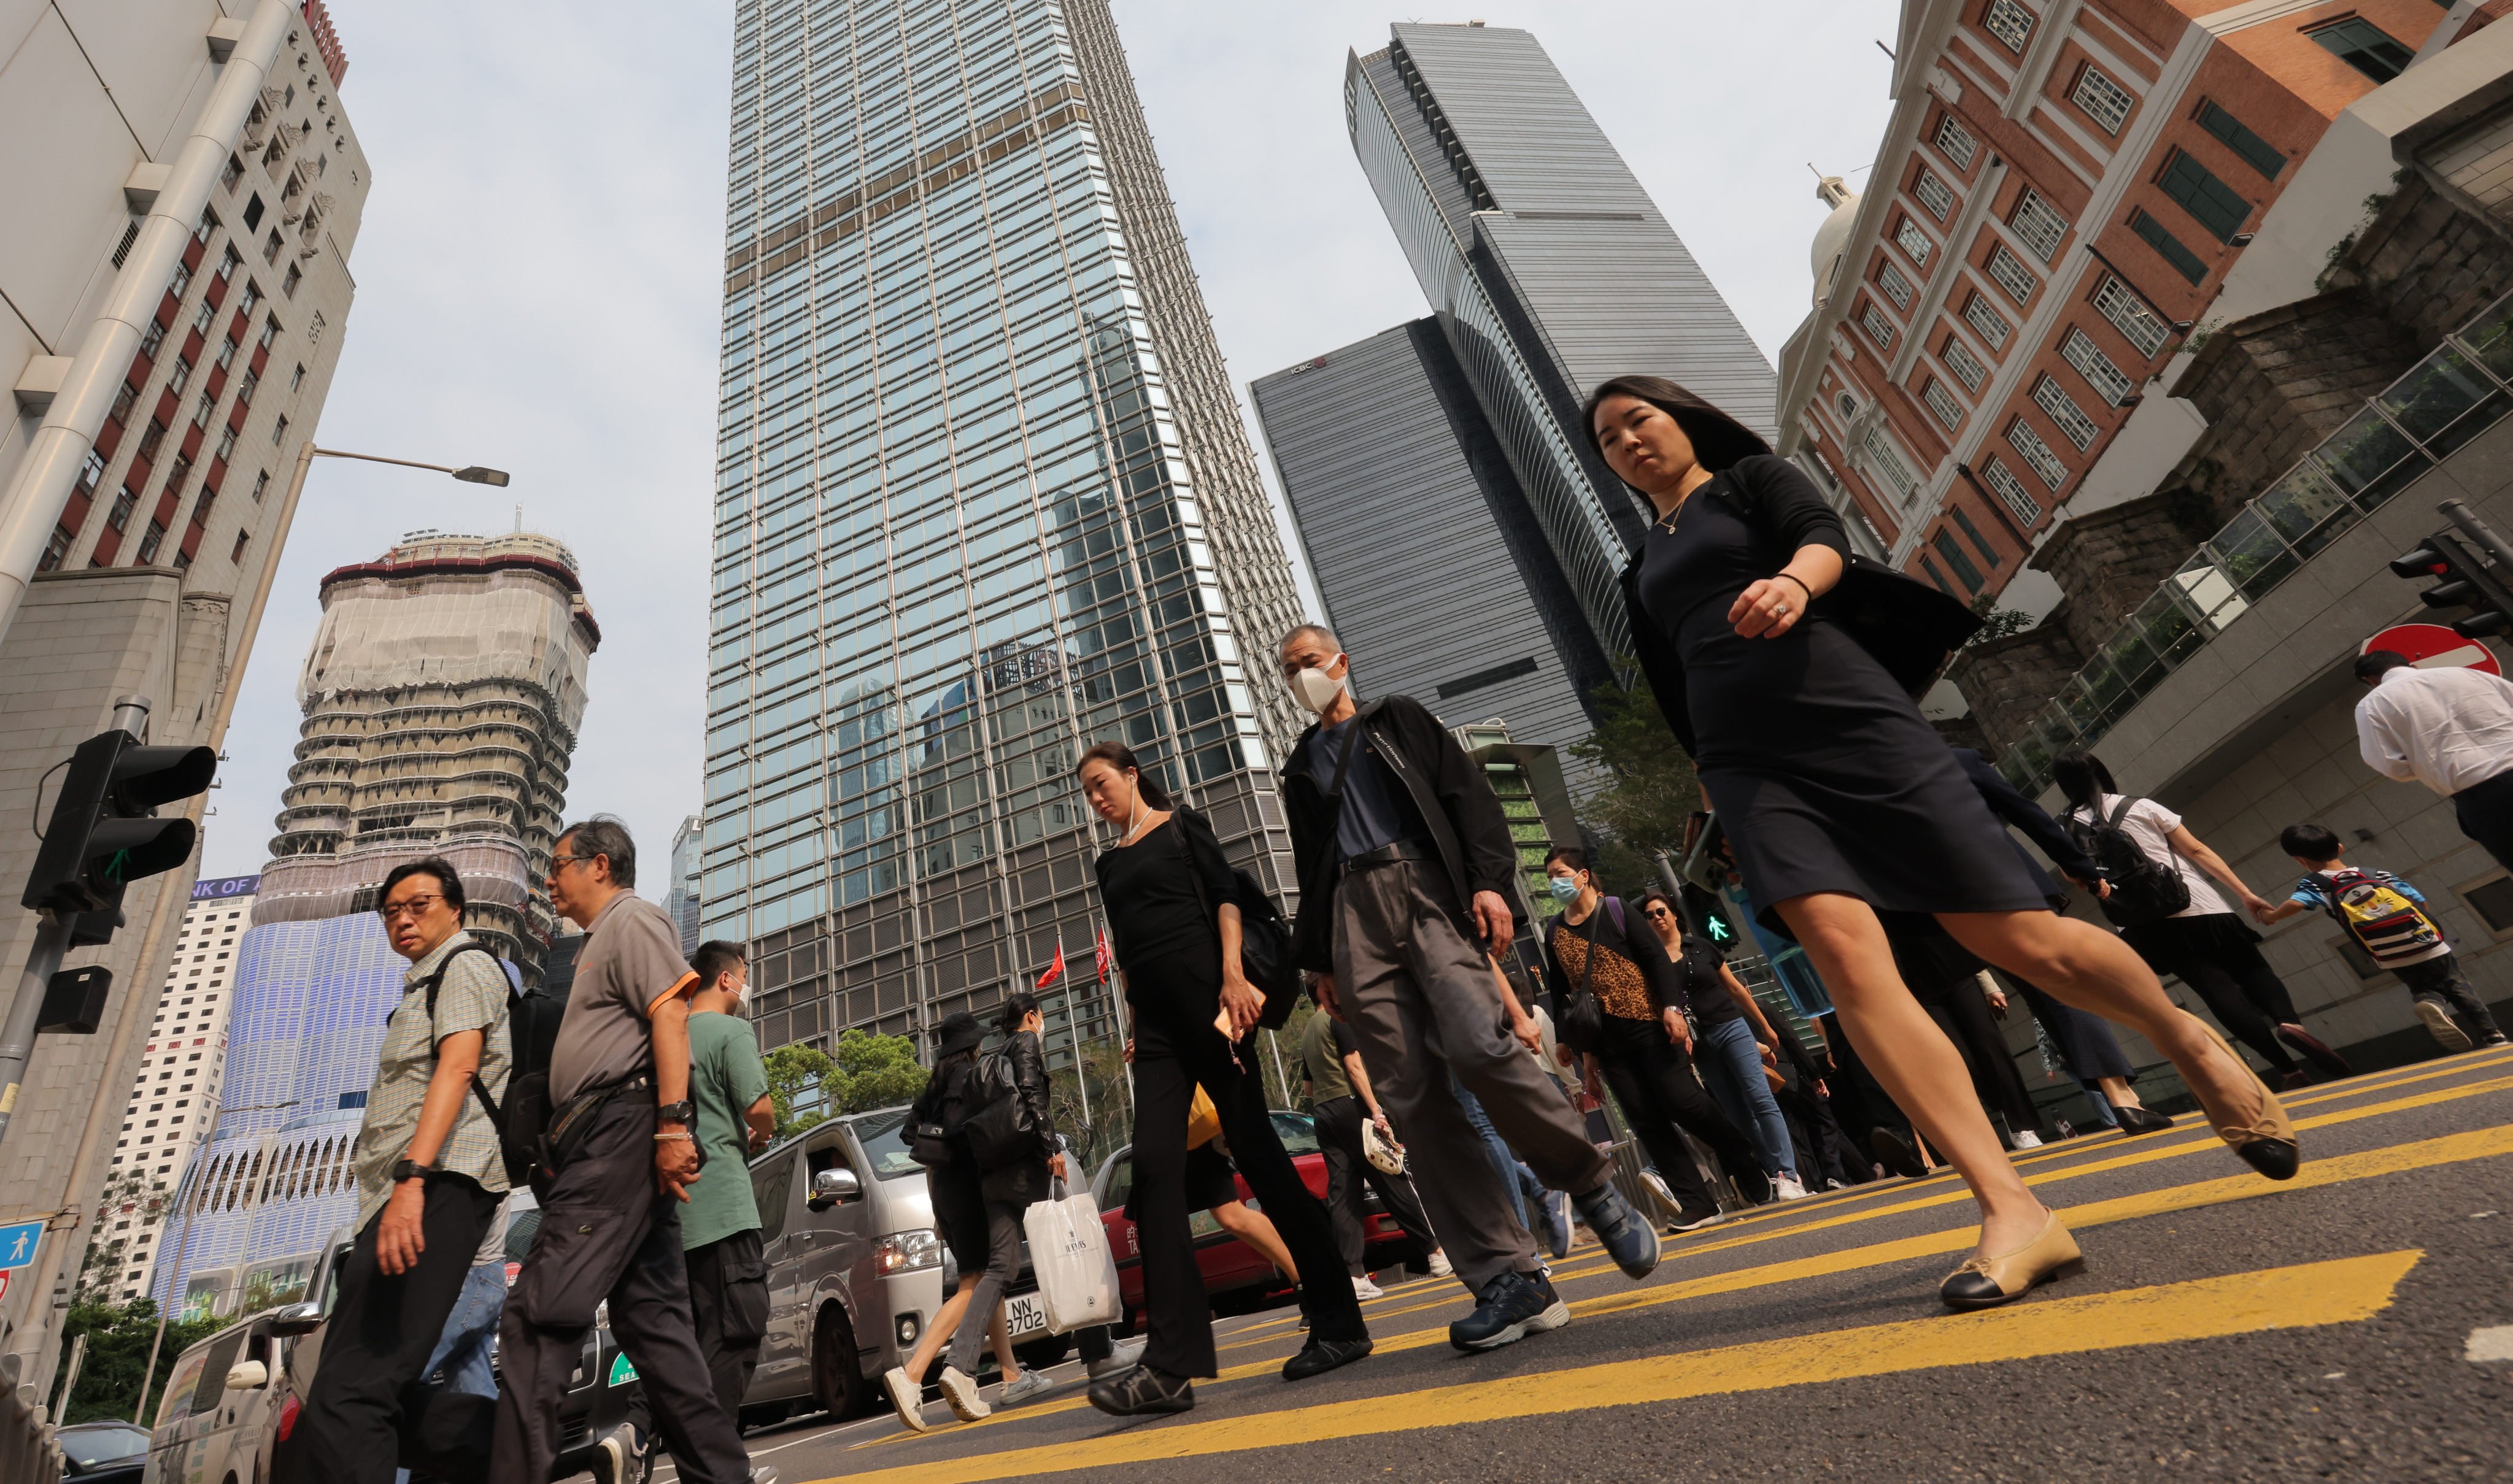 People cross the road in Central, Hong Kong. Employers keen to have workers back in the office are attempting to counter perceived negative impacts of remote working. Photo: SCMP